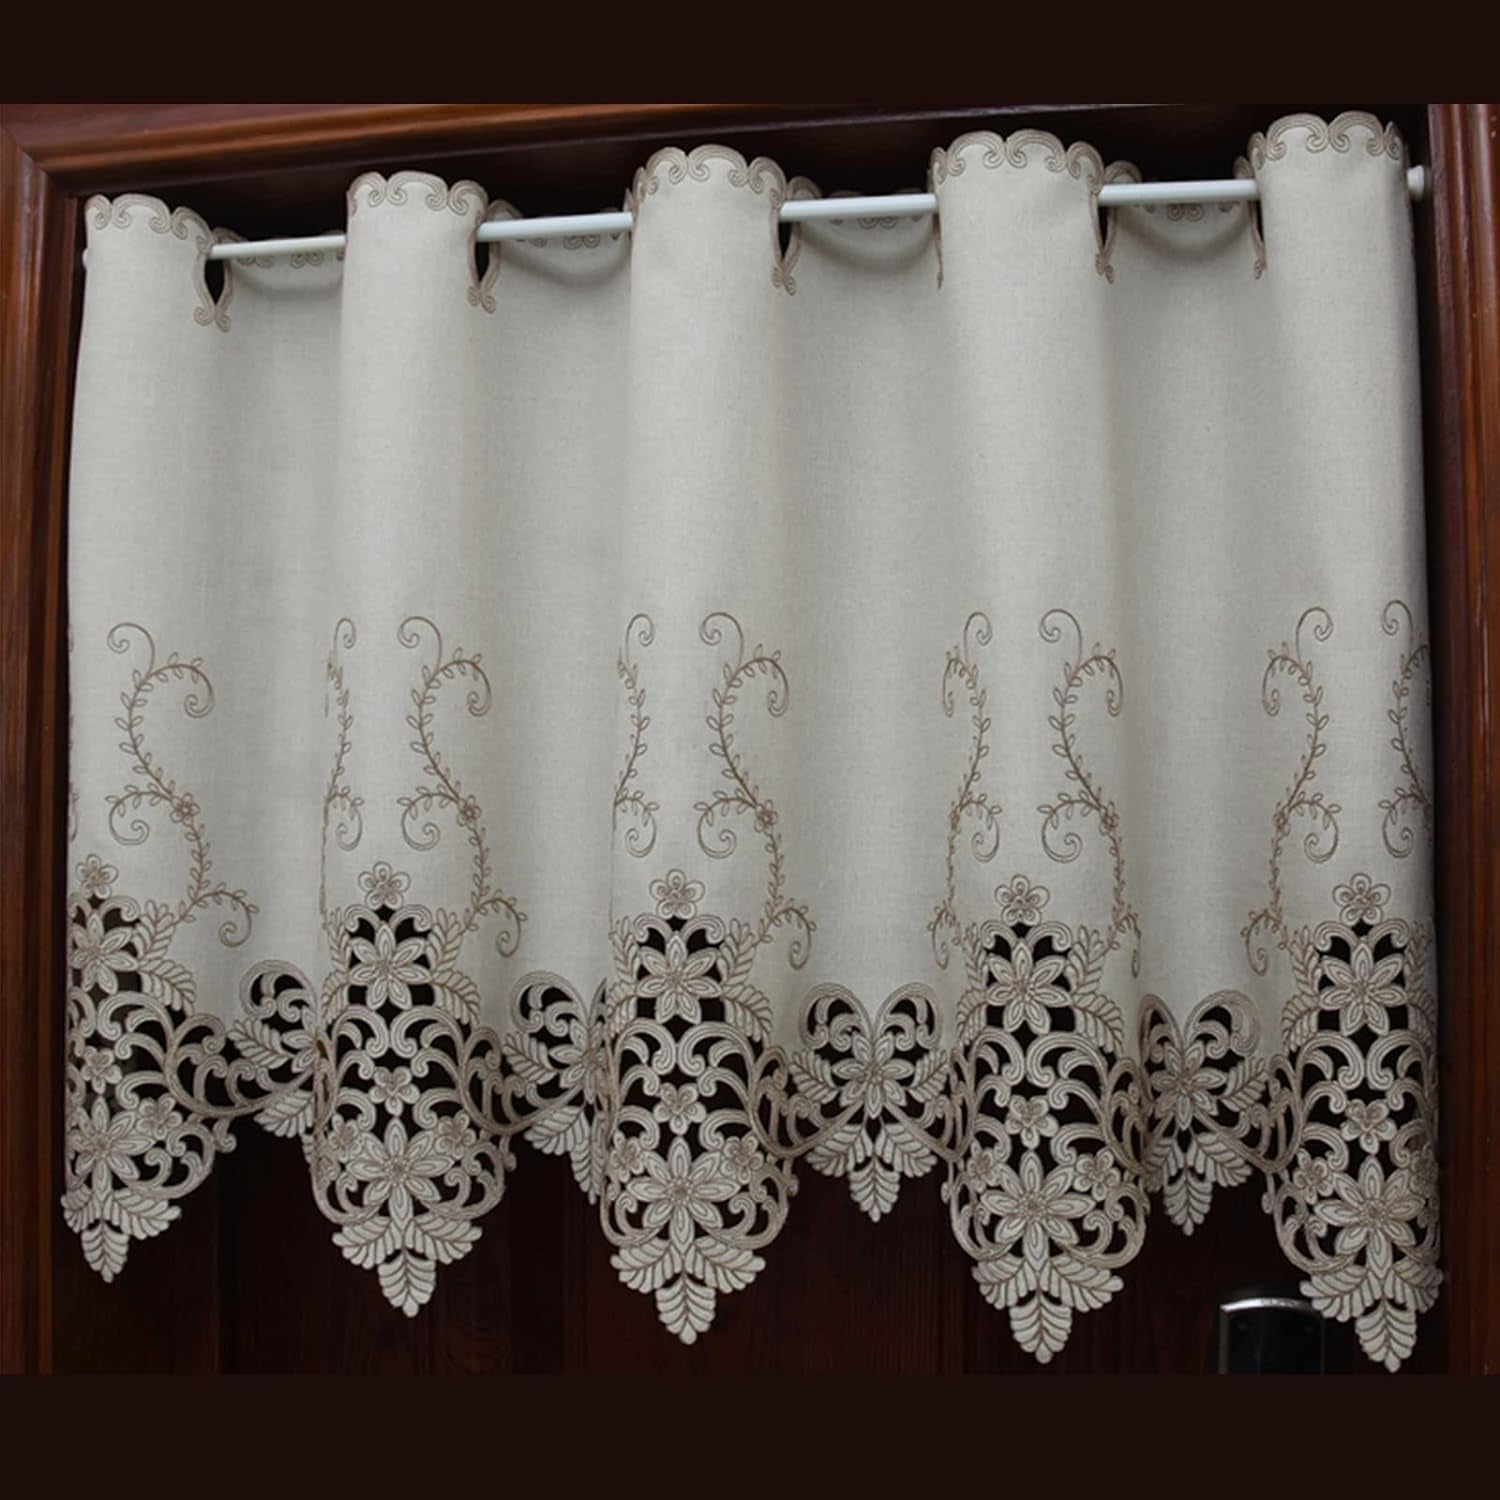 ABREEZE Pastoral Style Embroidered Floral Curtain Window Valance Cafe Curtain with Hollow Lace,59" W X 12" L